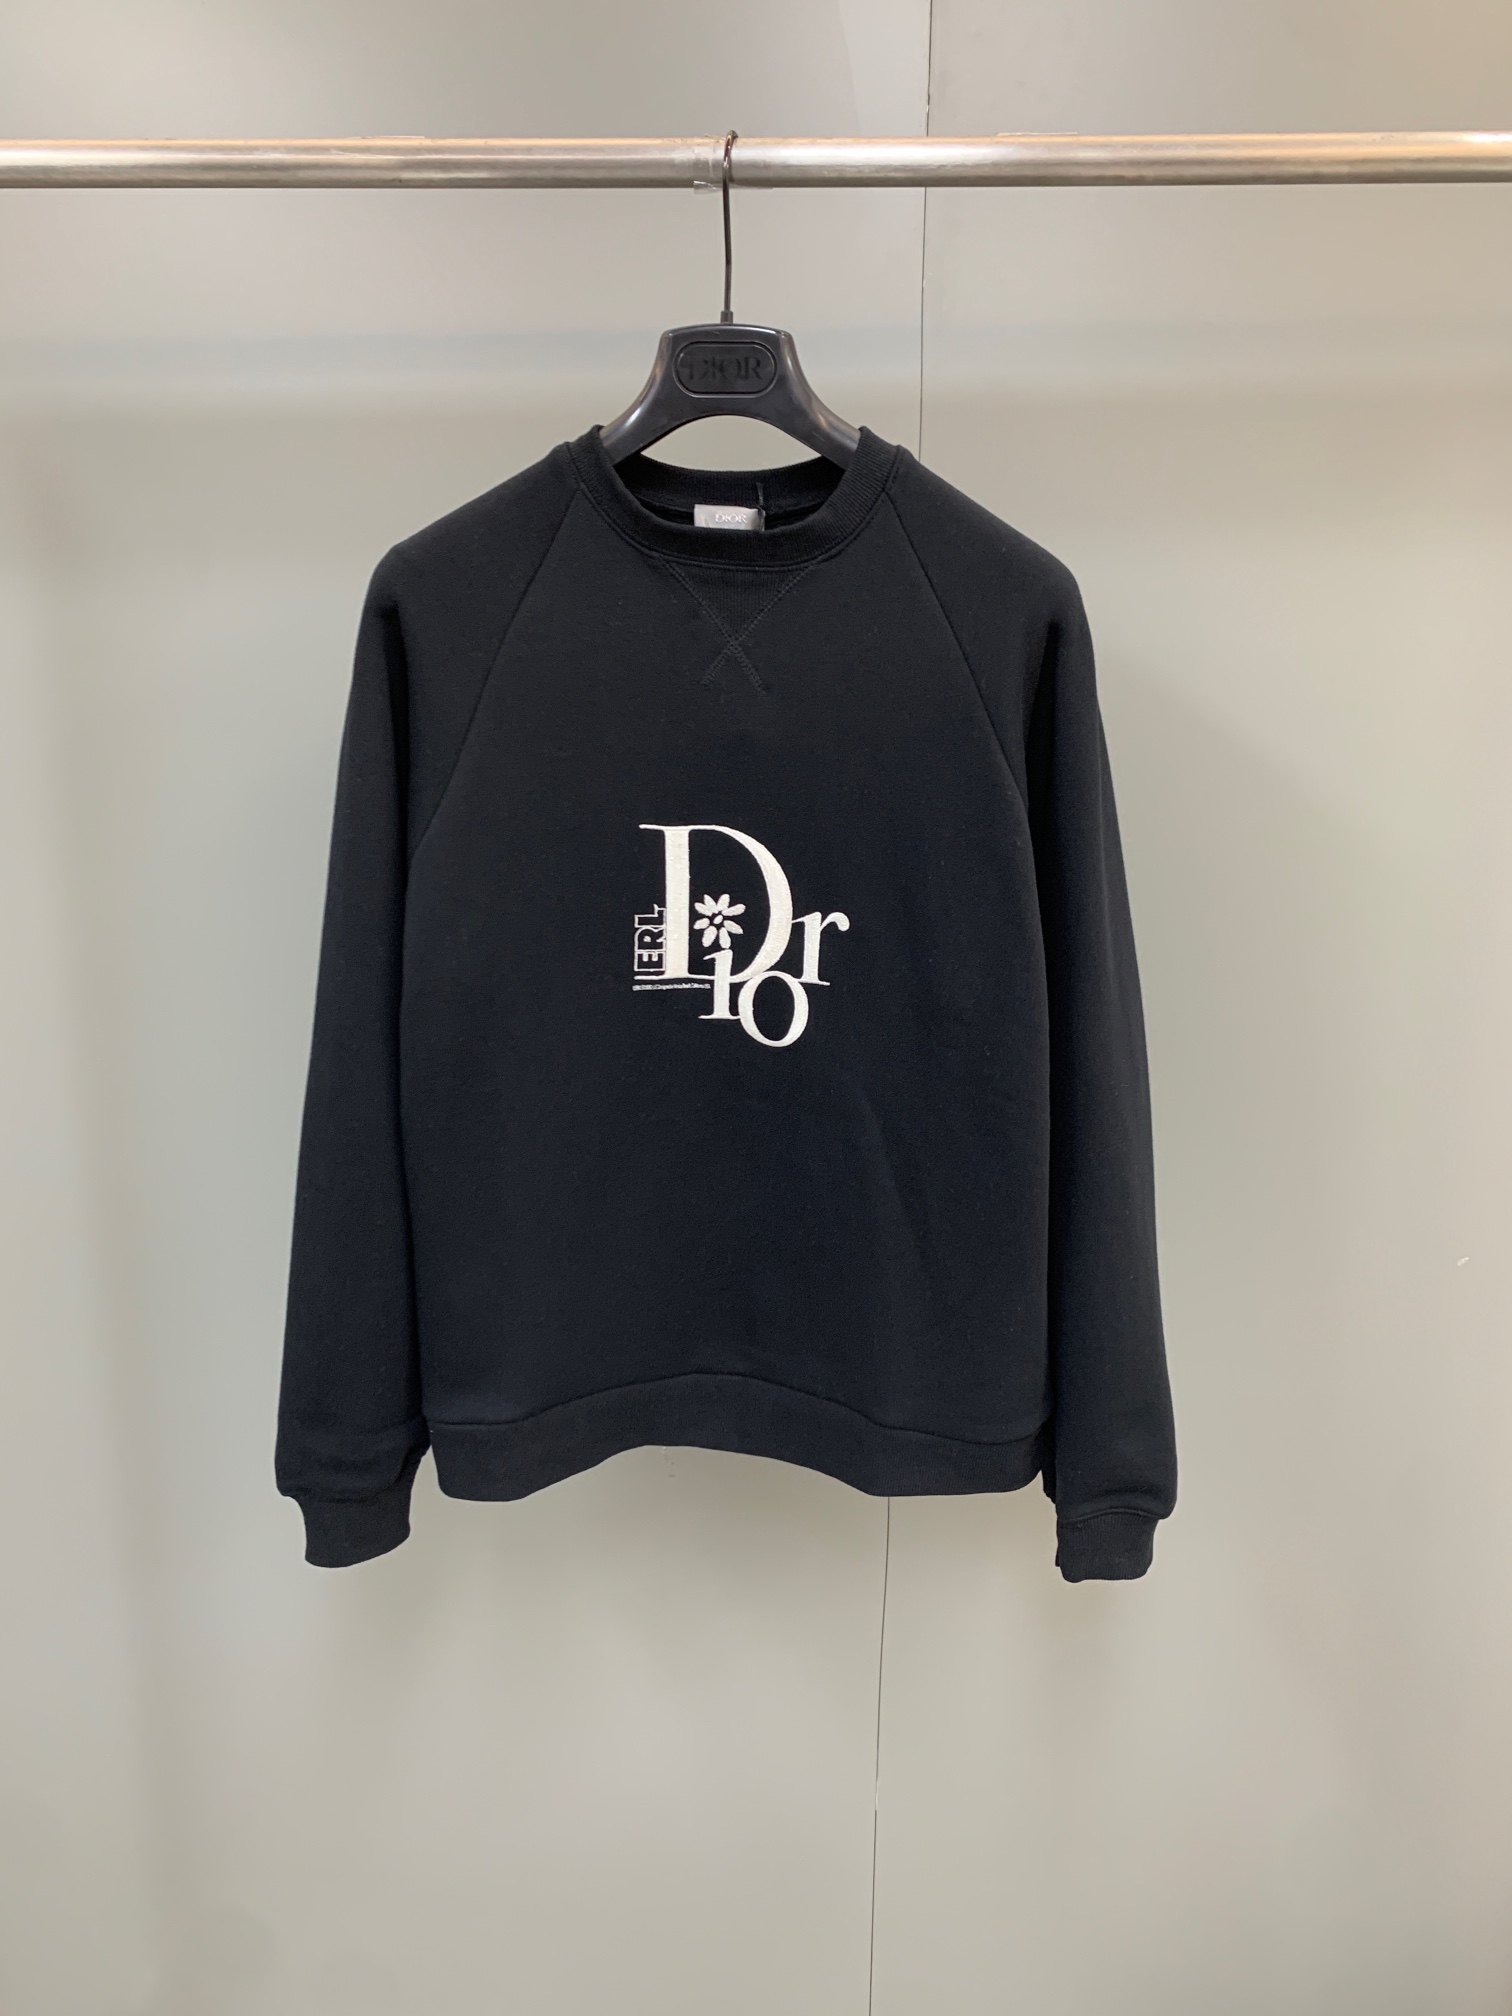 Dior Clothing T-Shirt Black White Embroidery Unisex Cotton Knitting Spring/Summer Collection Fashion Long Sleeve